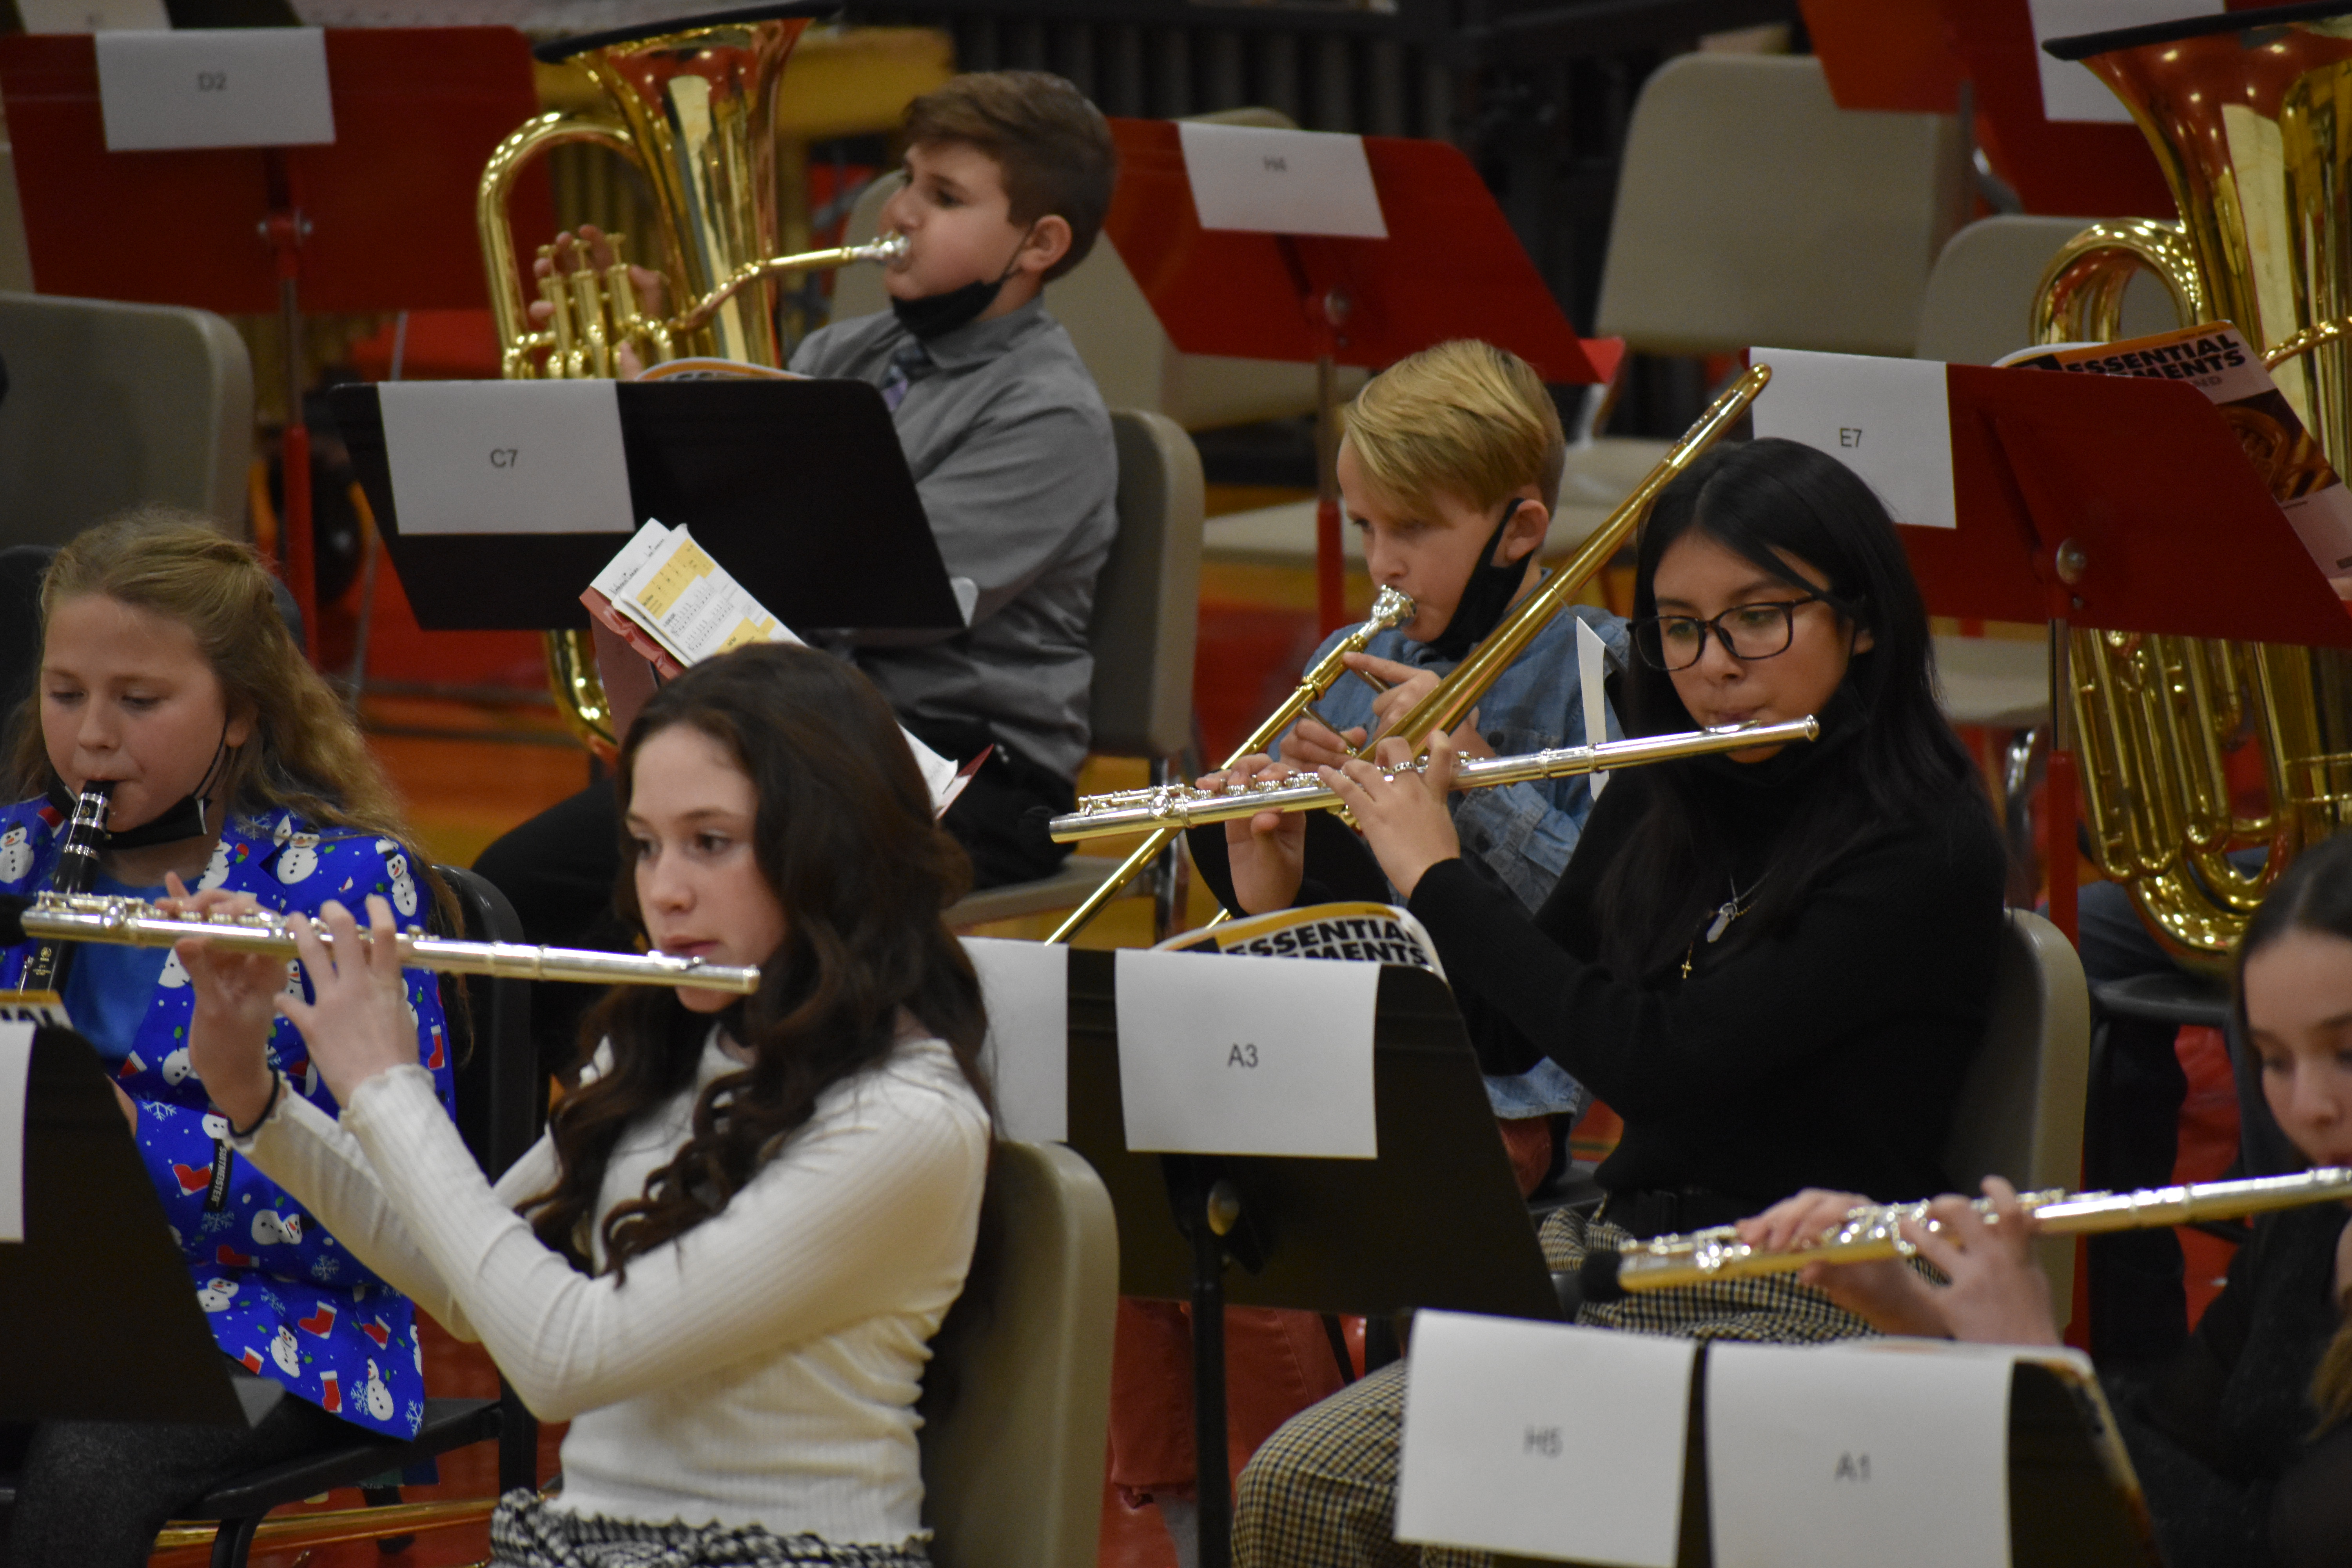 Band members playing during a concert - flutes in the foreground